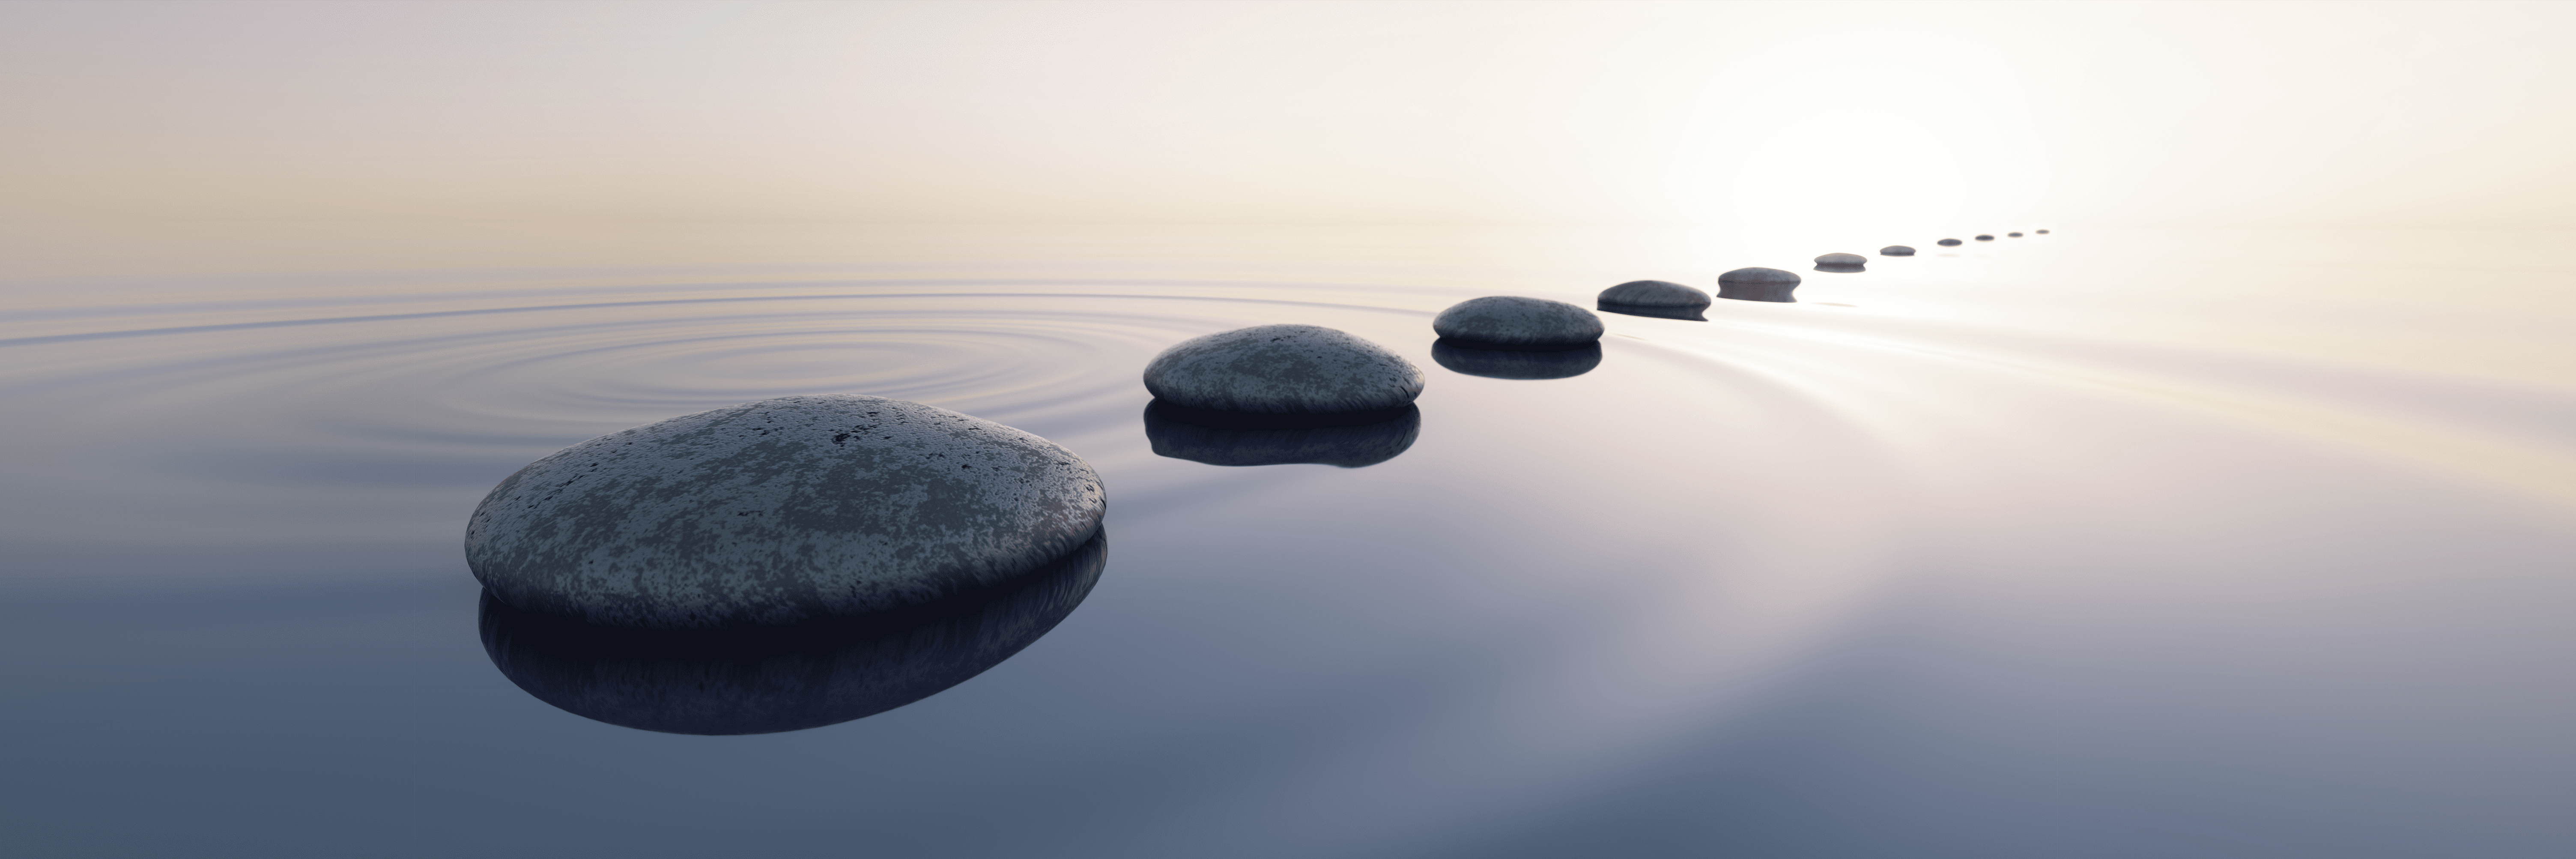 A still and calm lake with large stepping stones disappearing into the horizon